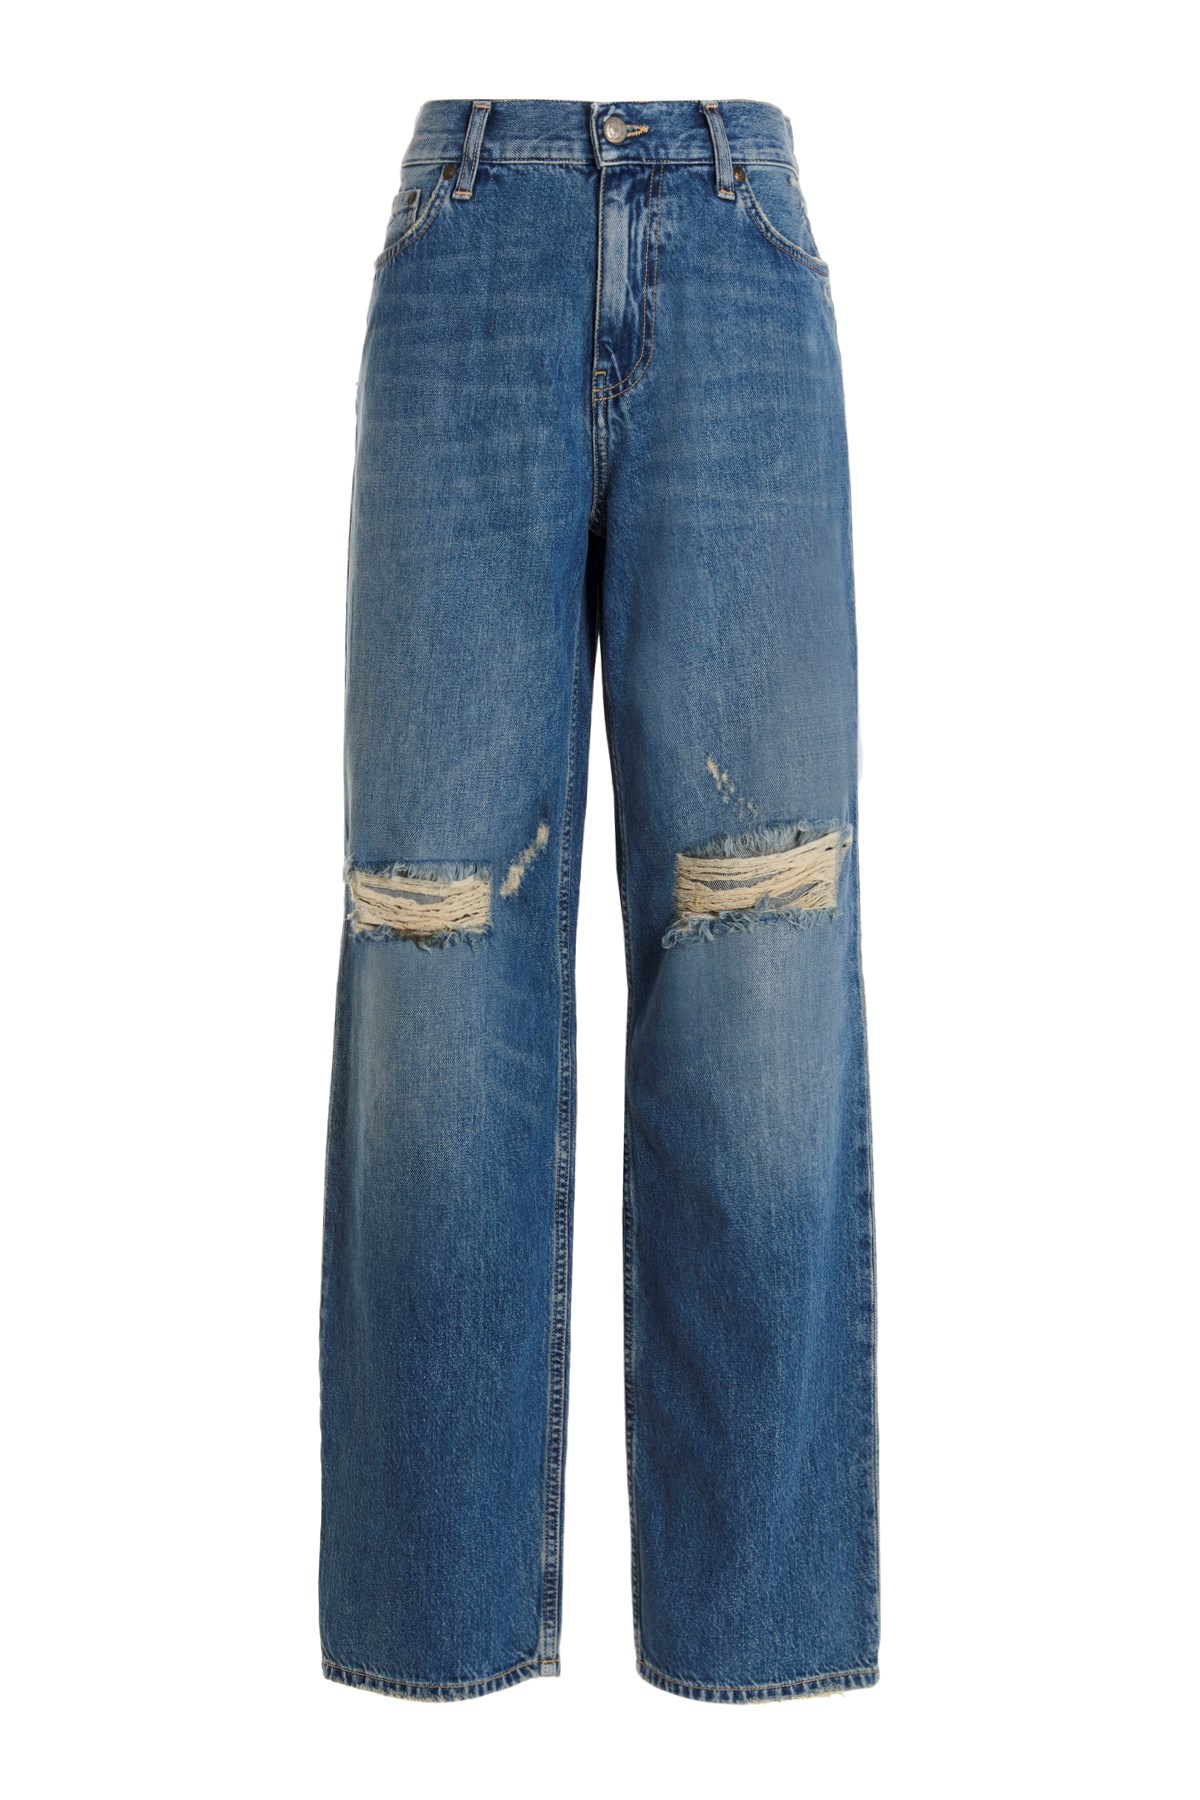 ROY ROGERS Jeans 'Cindy'